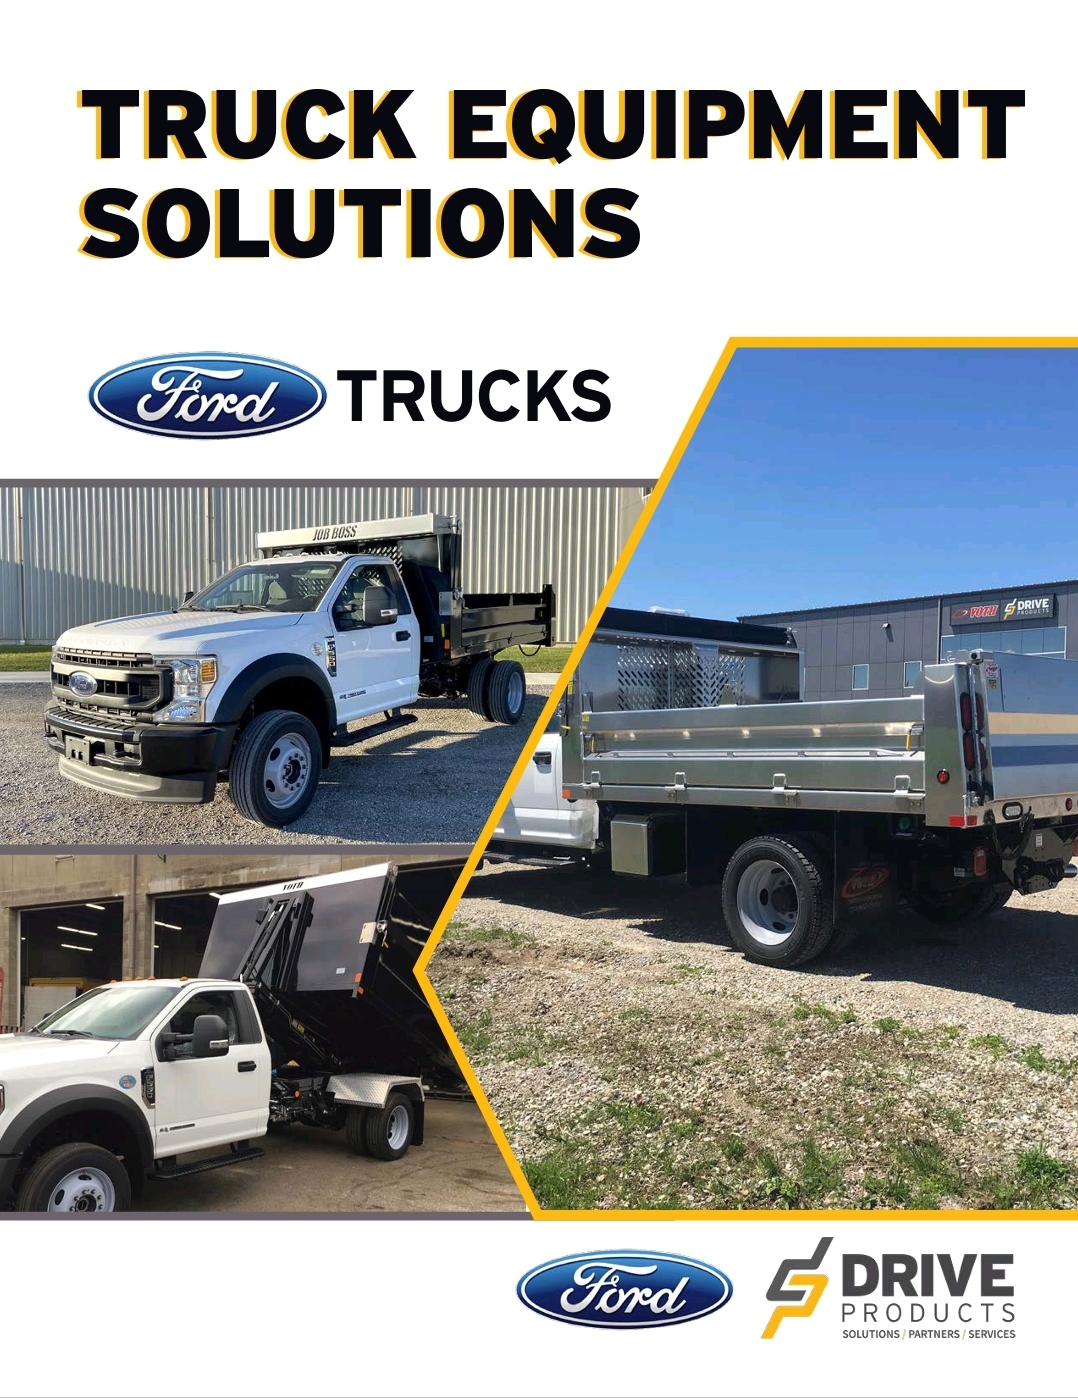 Ford truck solutions 